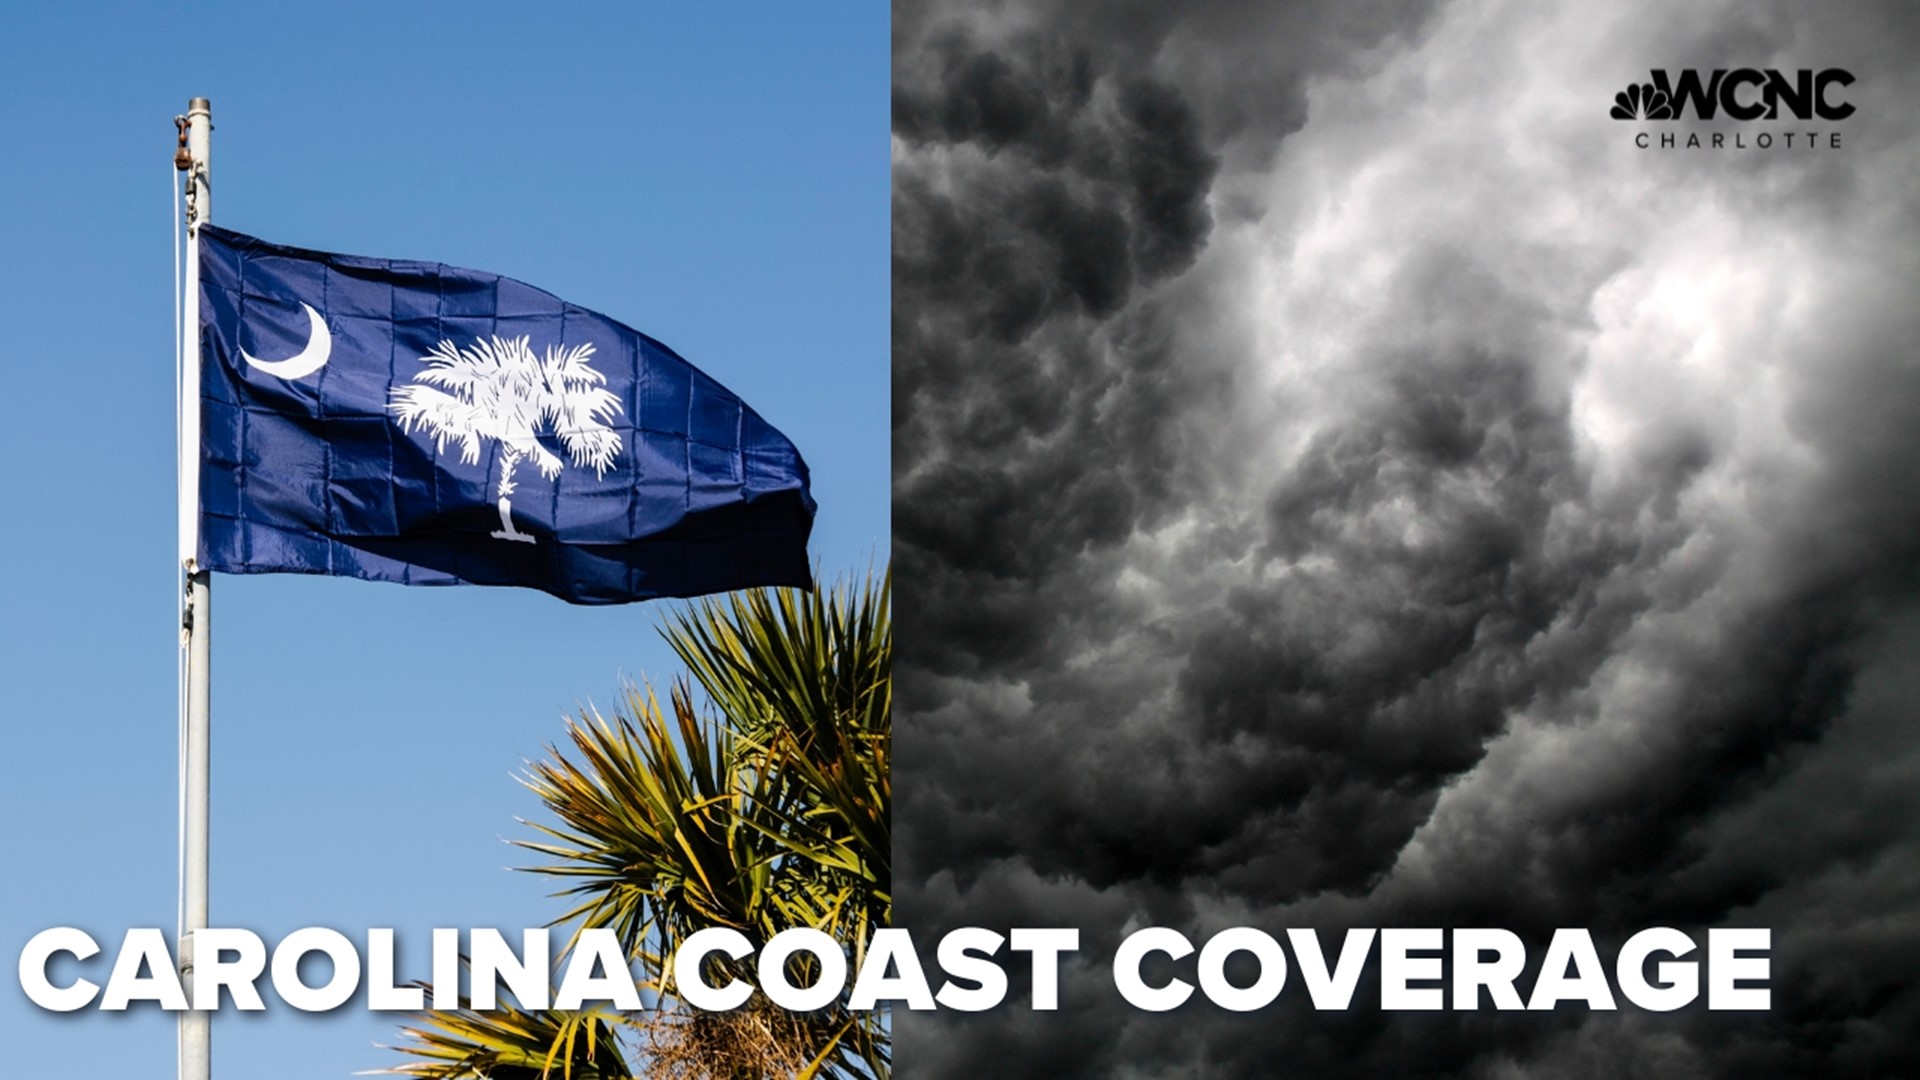 Many in the Carolinas are bracing for the impact.